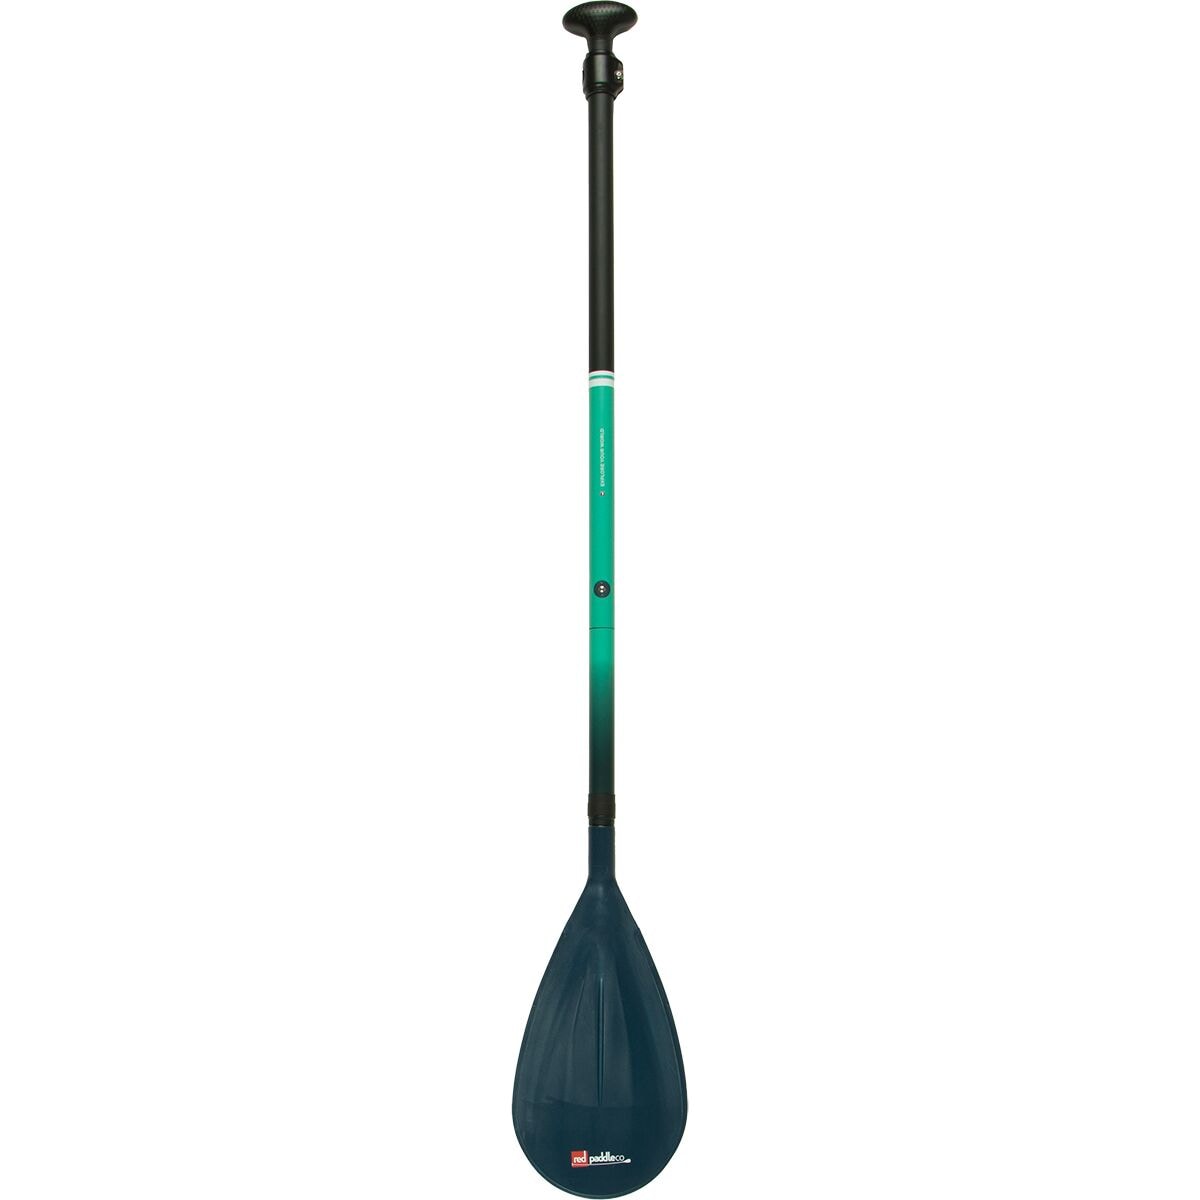 Red Paddle Co. Cruiser Tough 3-Piece CamLock Adjustable SUP Paddle - 2022